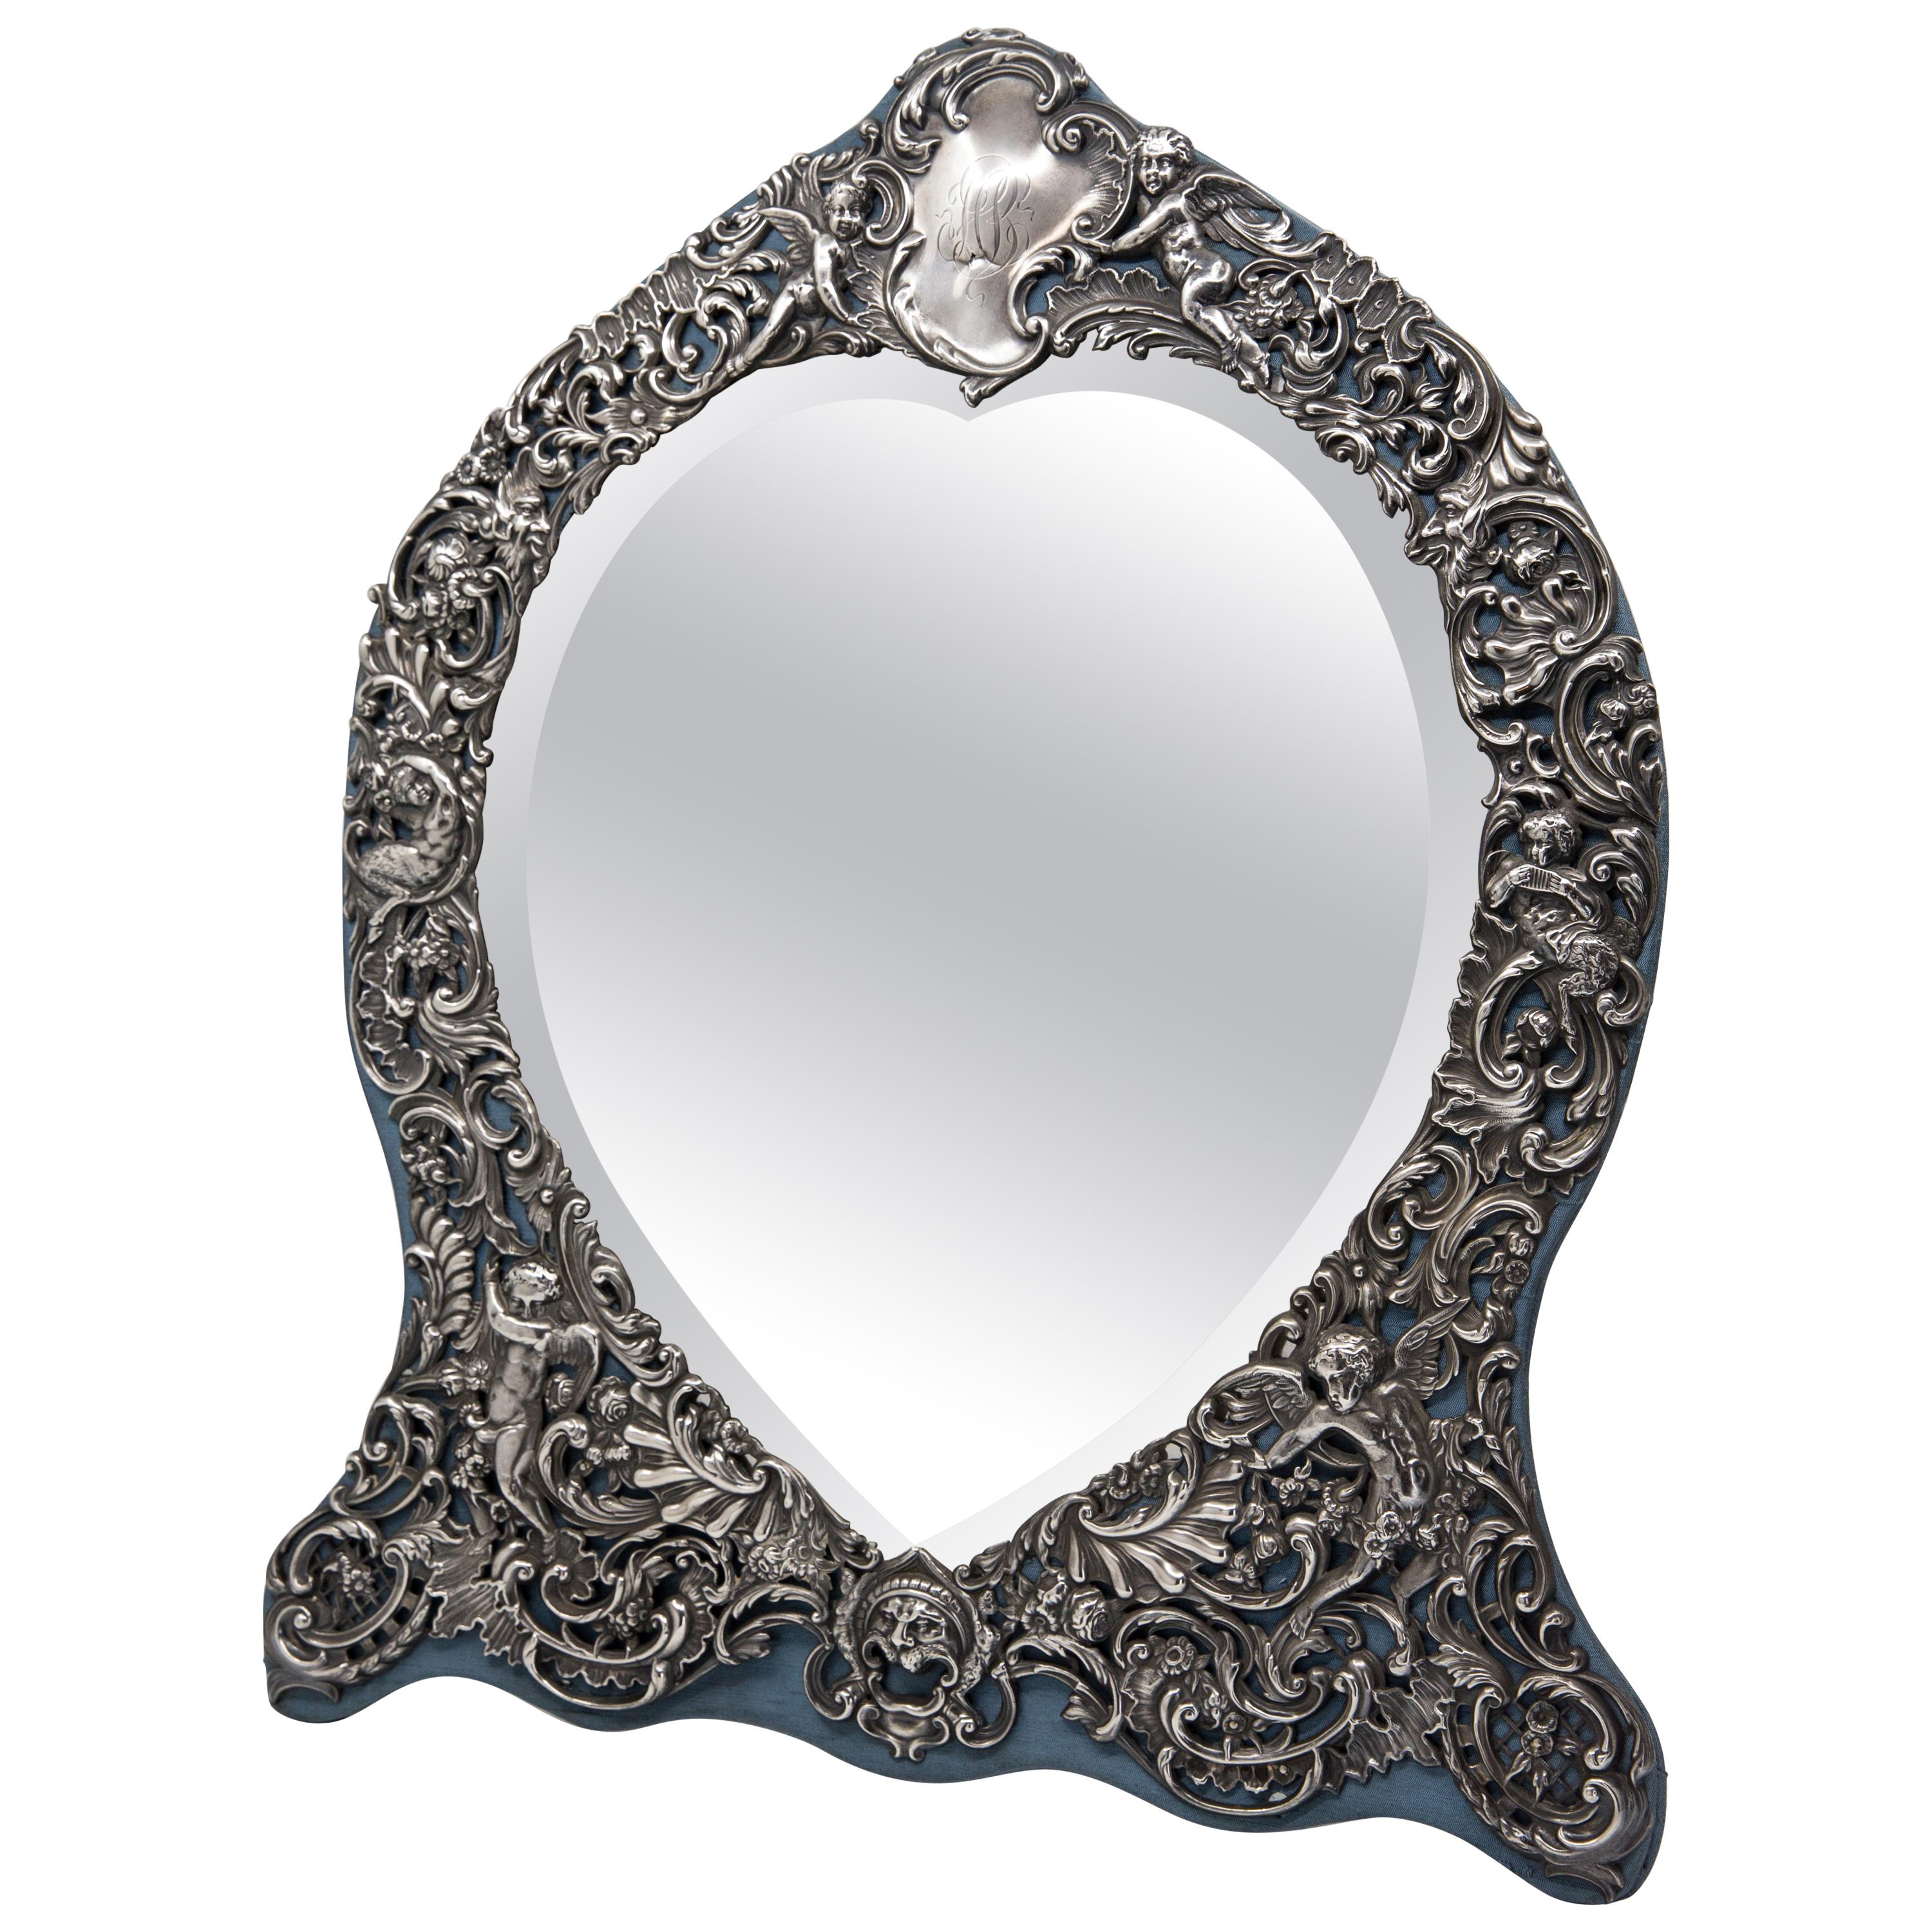 Sterling Silver Victorian Mirror with Elaborate Repousse Work